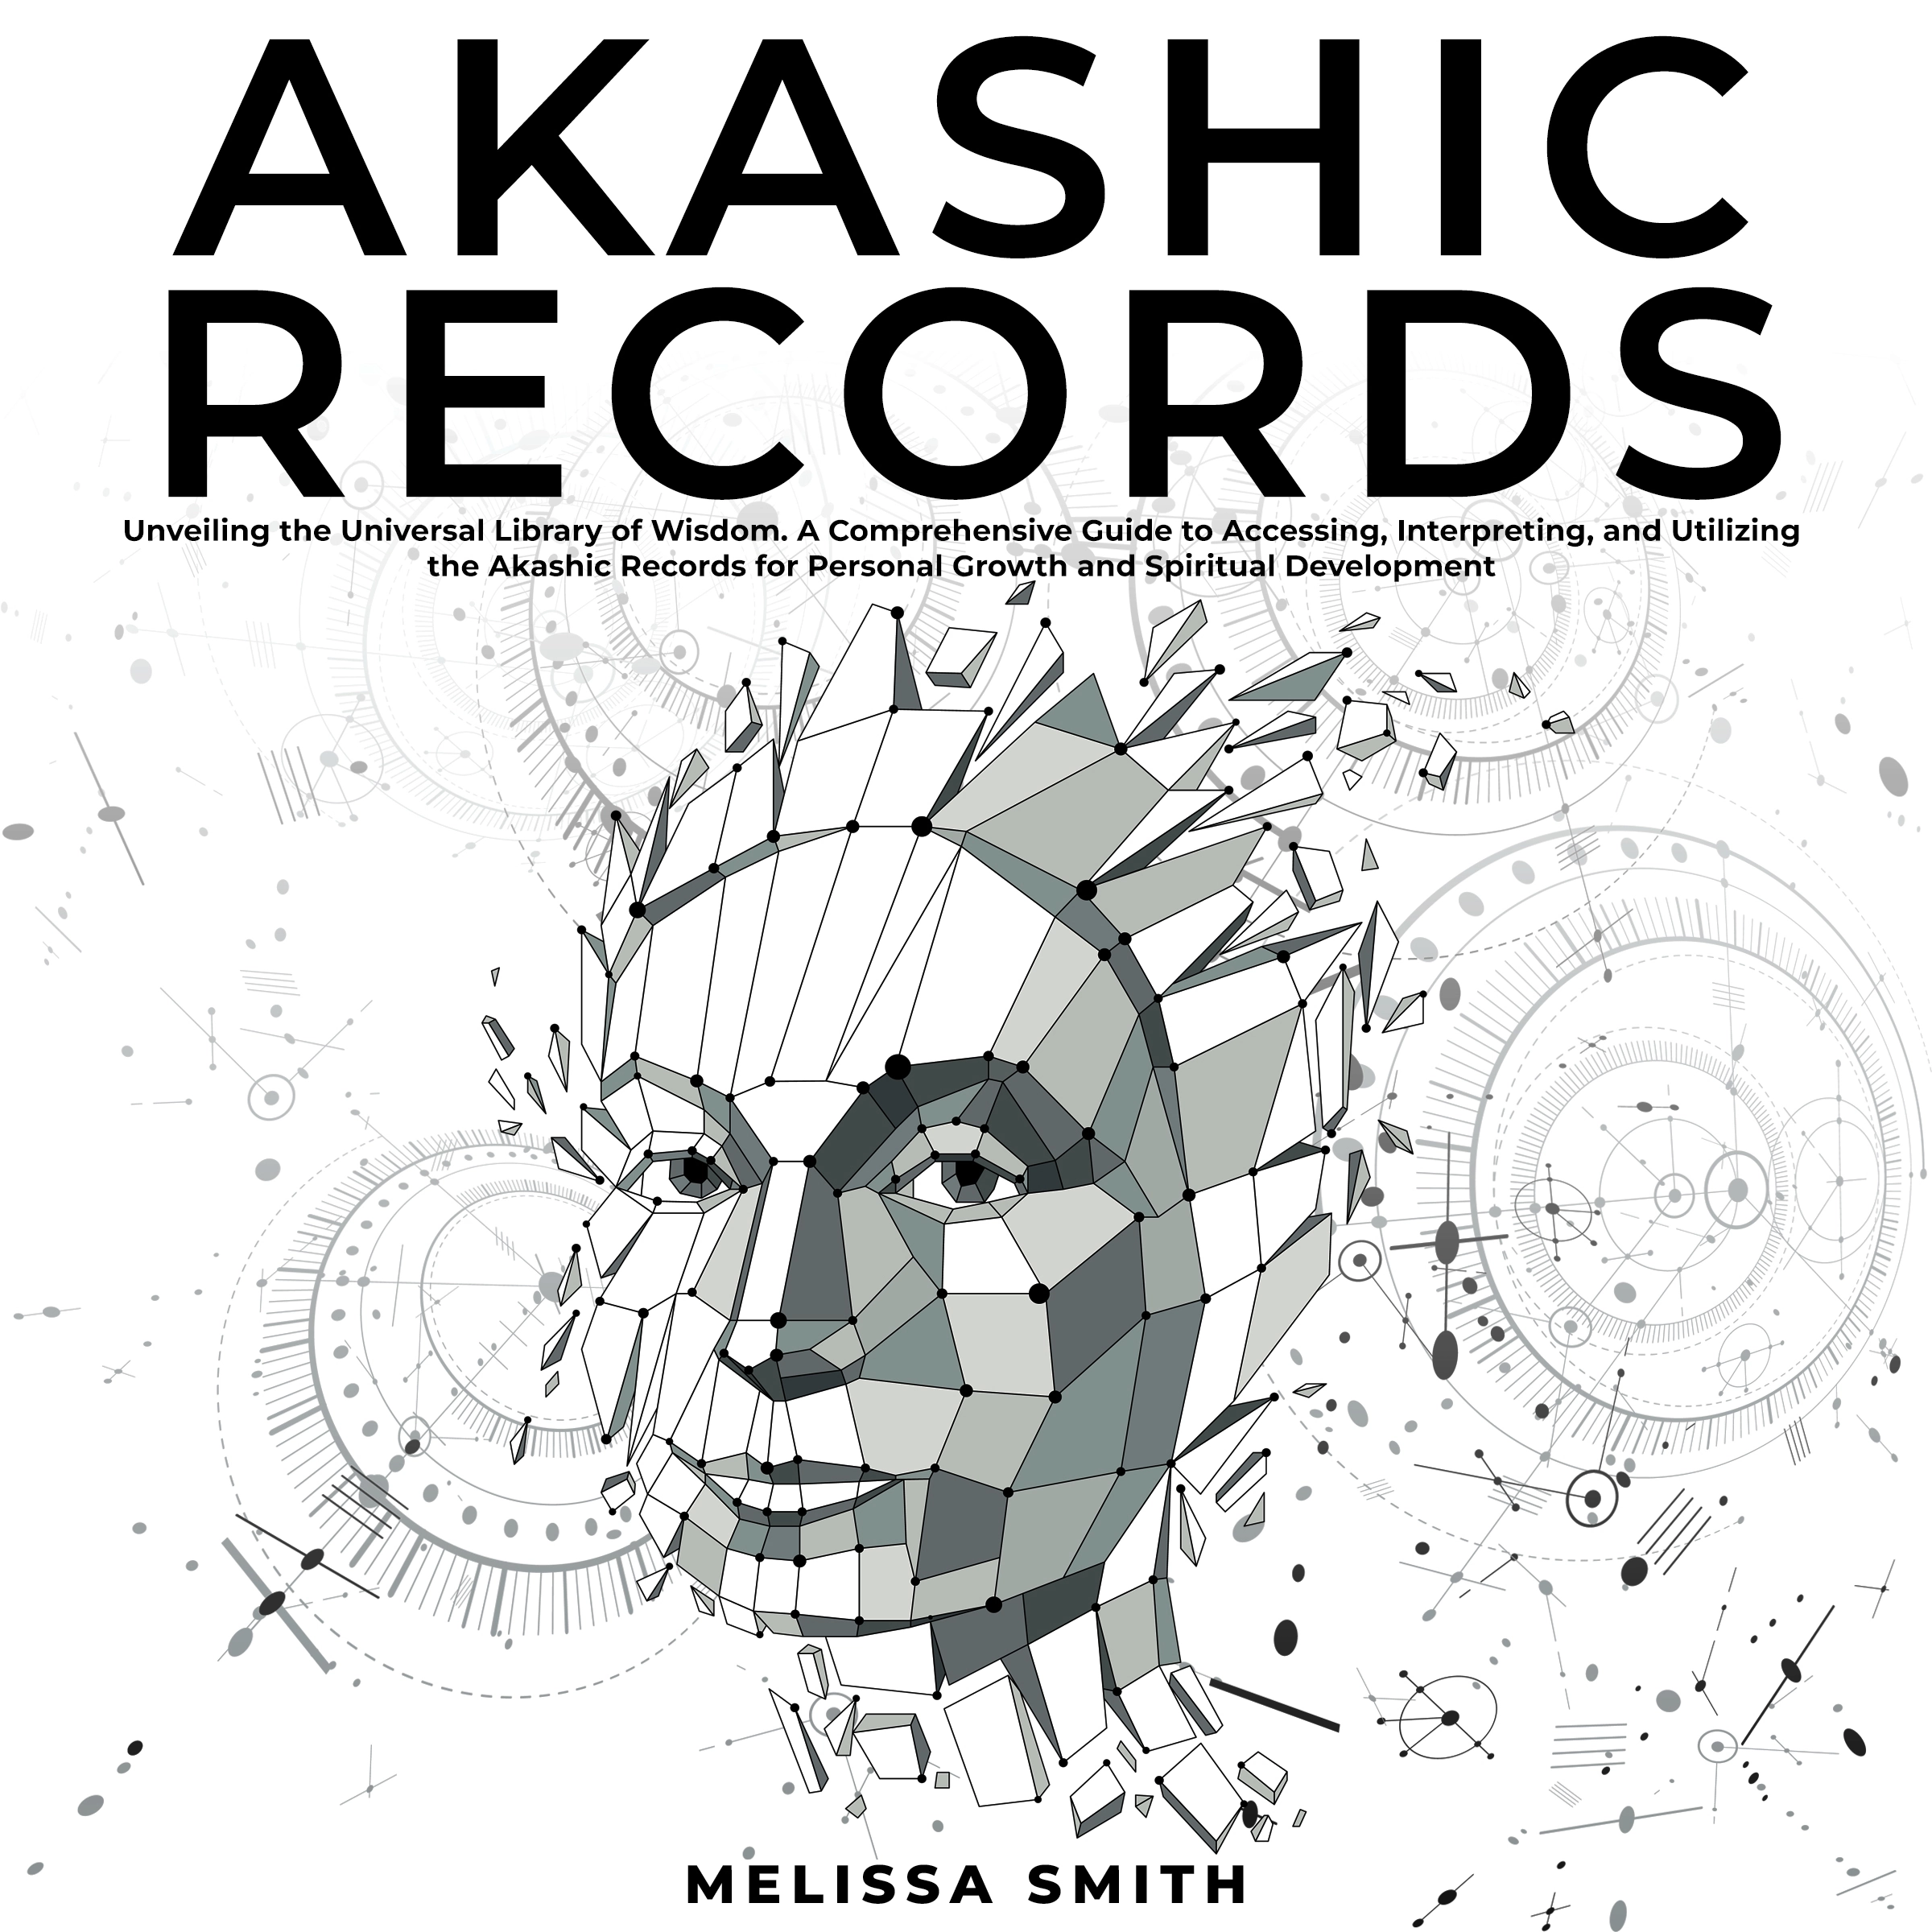 Akashic Records: Unveiling the Universal Library of Wisdom. A Comprehensive Guide to Accessing, Interpreting, and Utilizing the Akashic Records for Personal Growth and Spiritual Development Audiobook by Melissa Smith